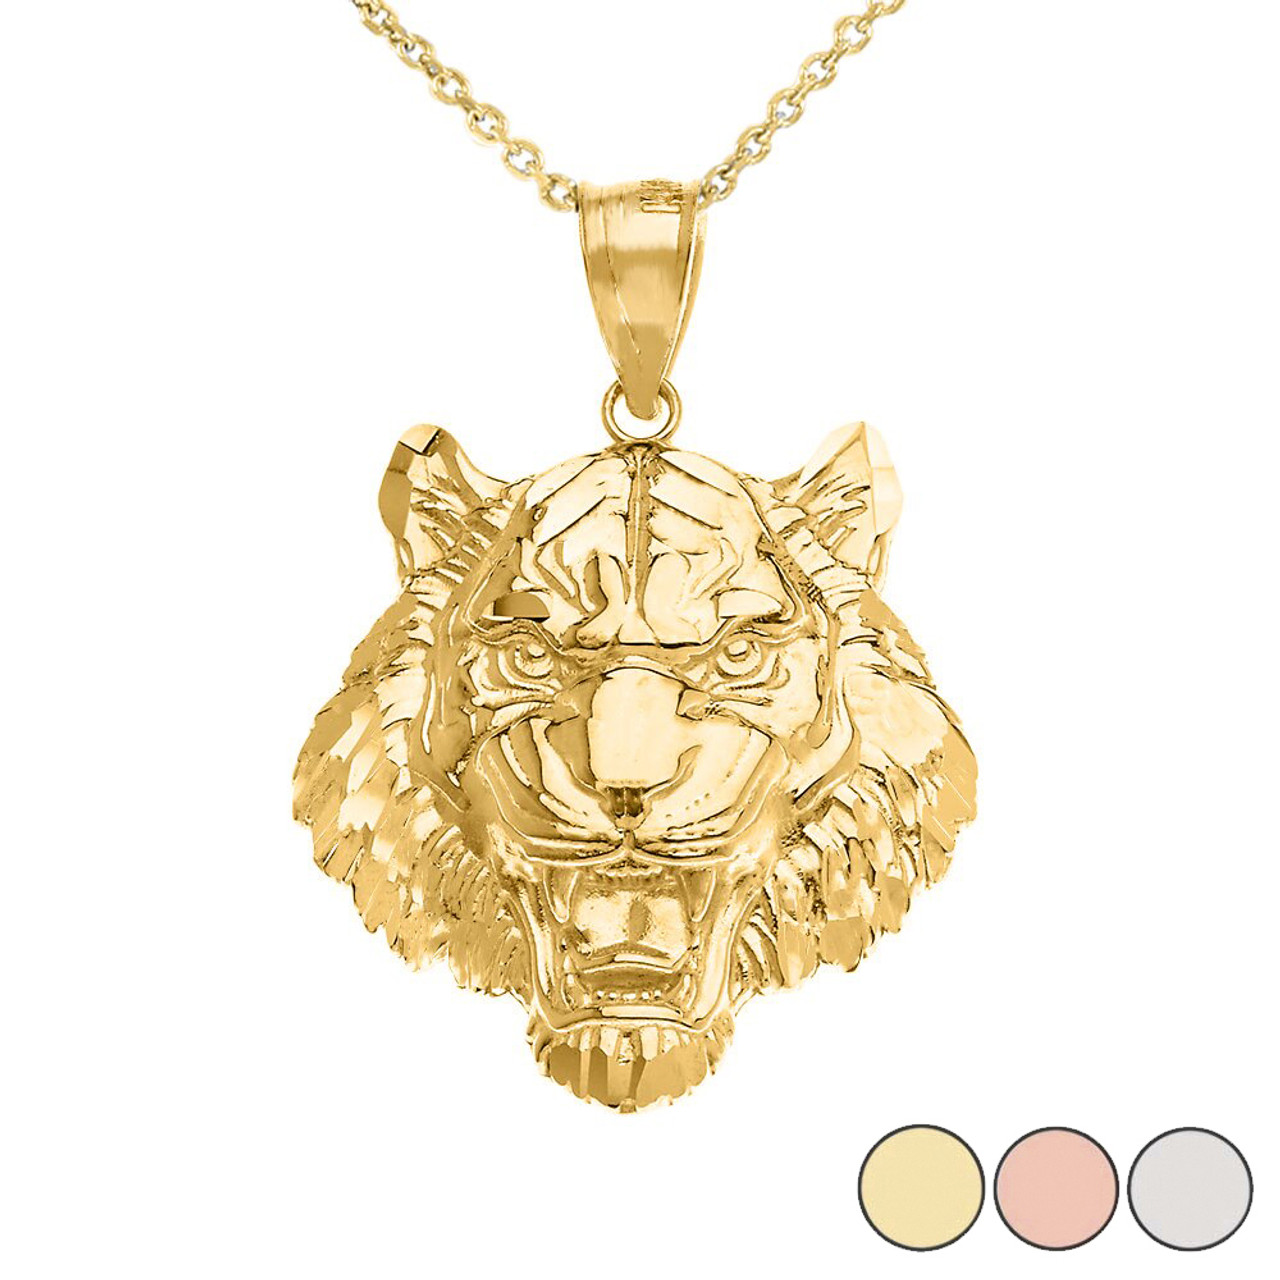 Solid Yellow White Rose Gold Or 925 Silver Diamond Cut Tiger Pendant Necklace 